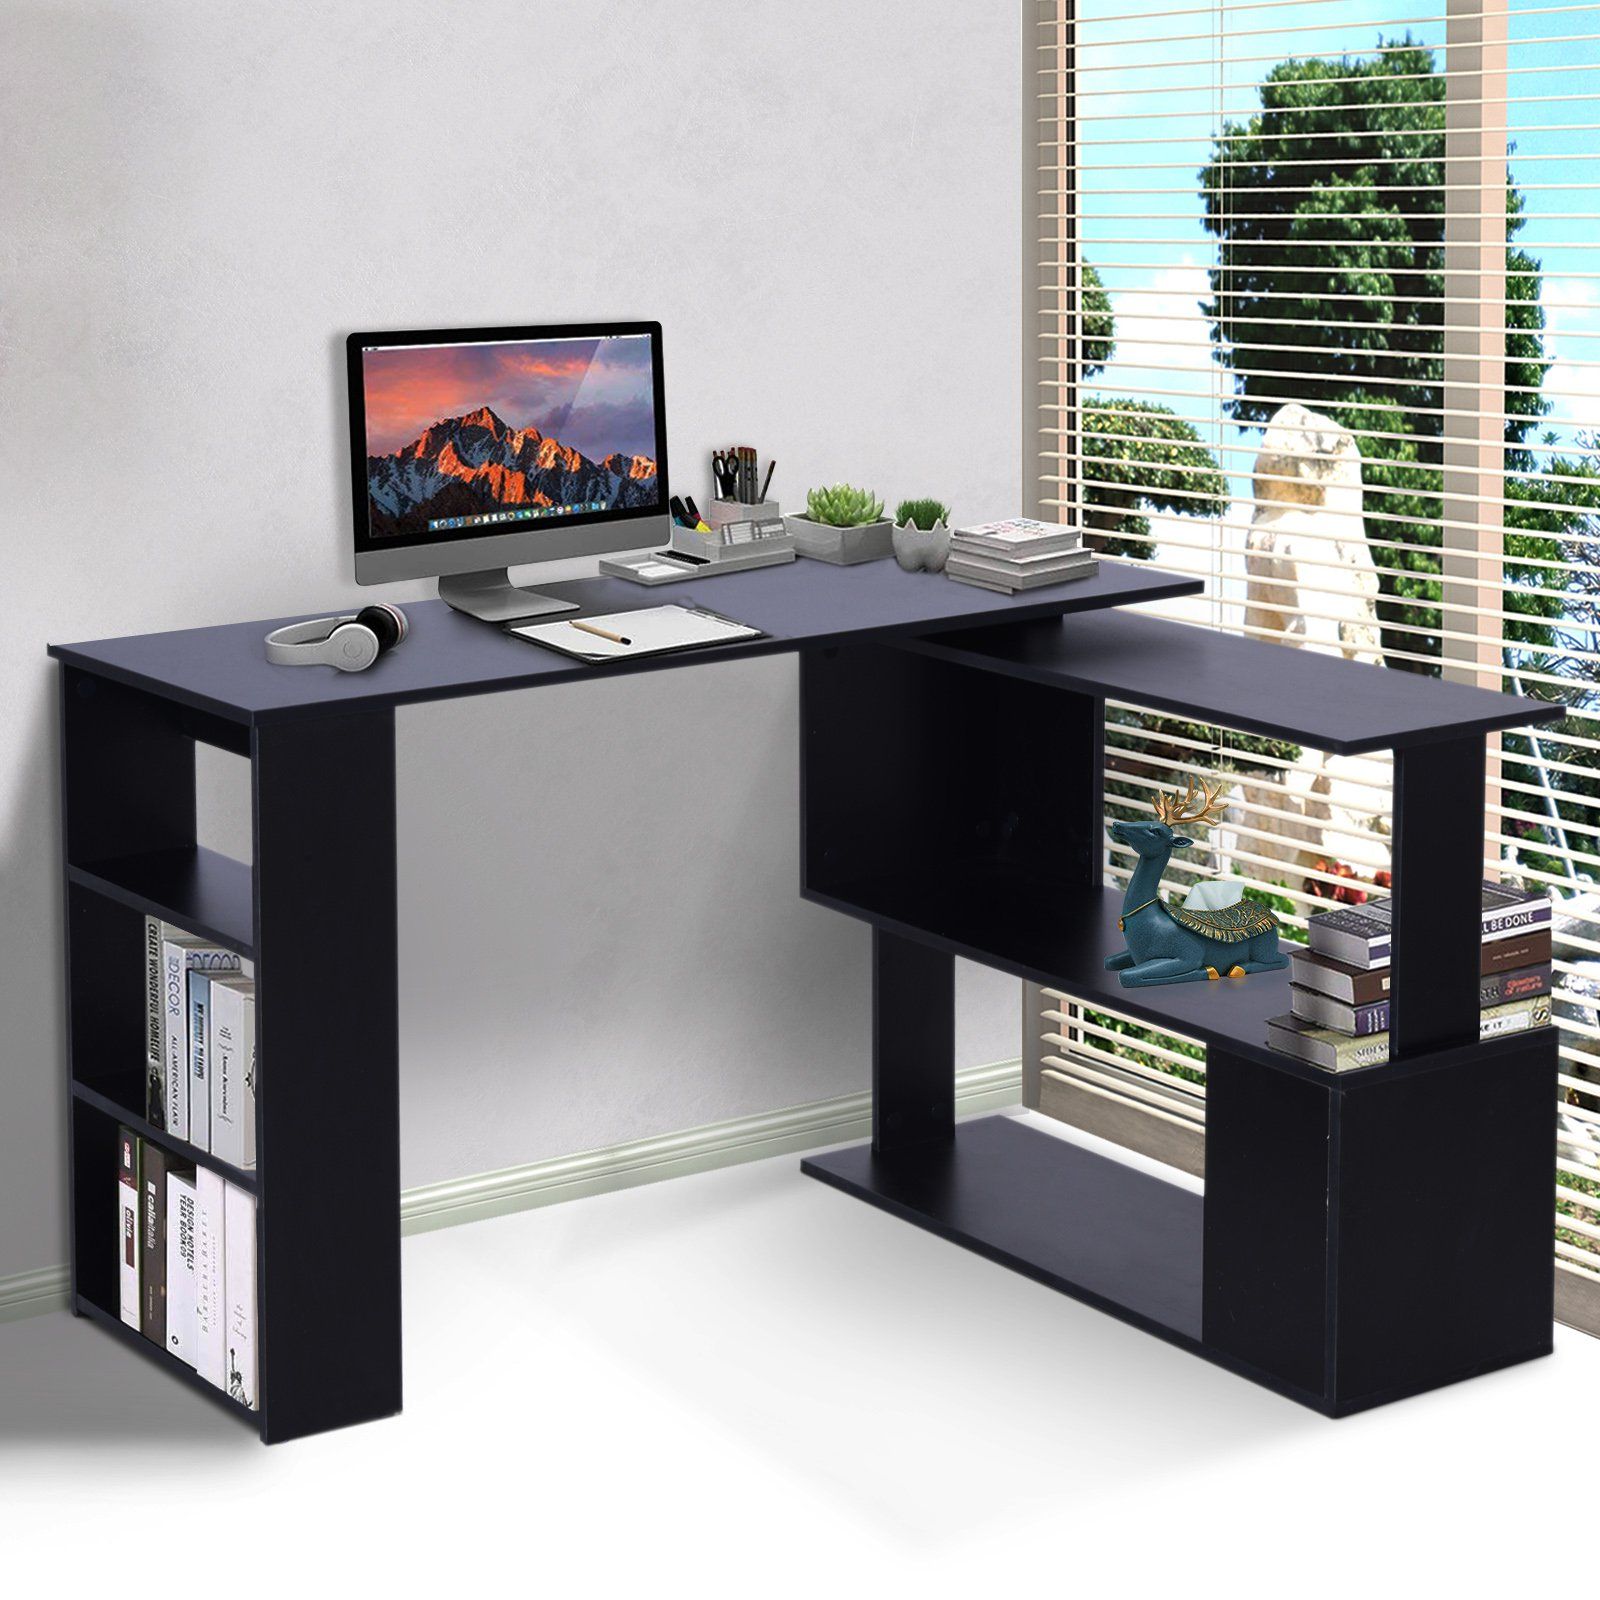 360° Rotating Home Office Corner Desk And Storage Shelf Combo – Black Intended For Most Popular Black And Cinnamon Office Desks (View 5 of 15)